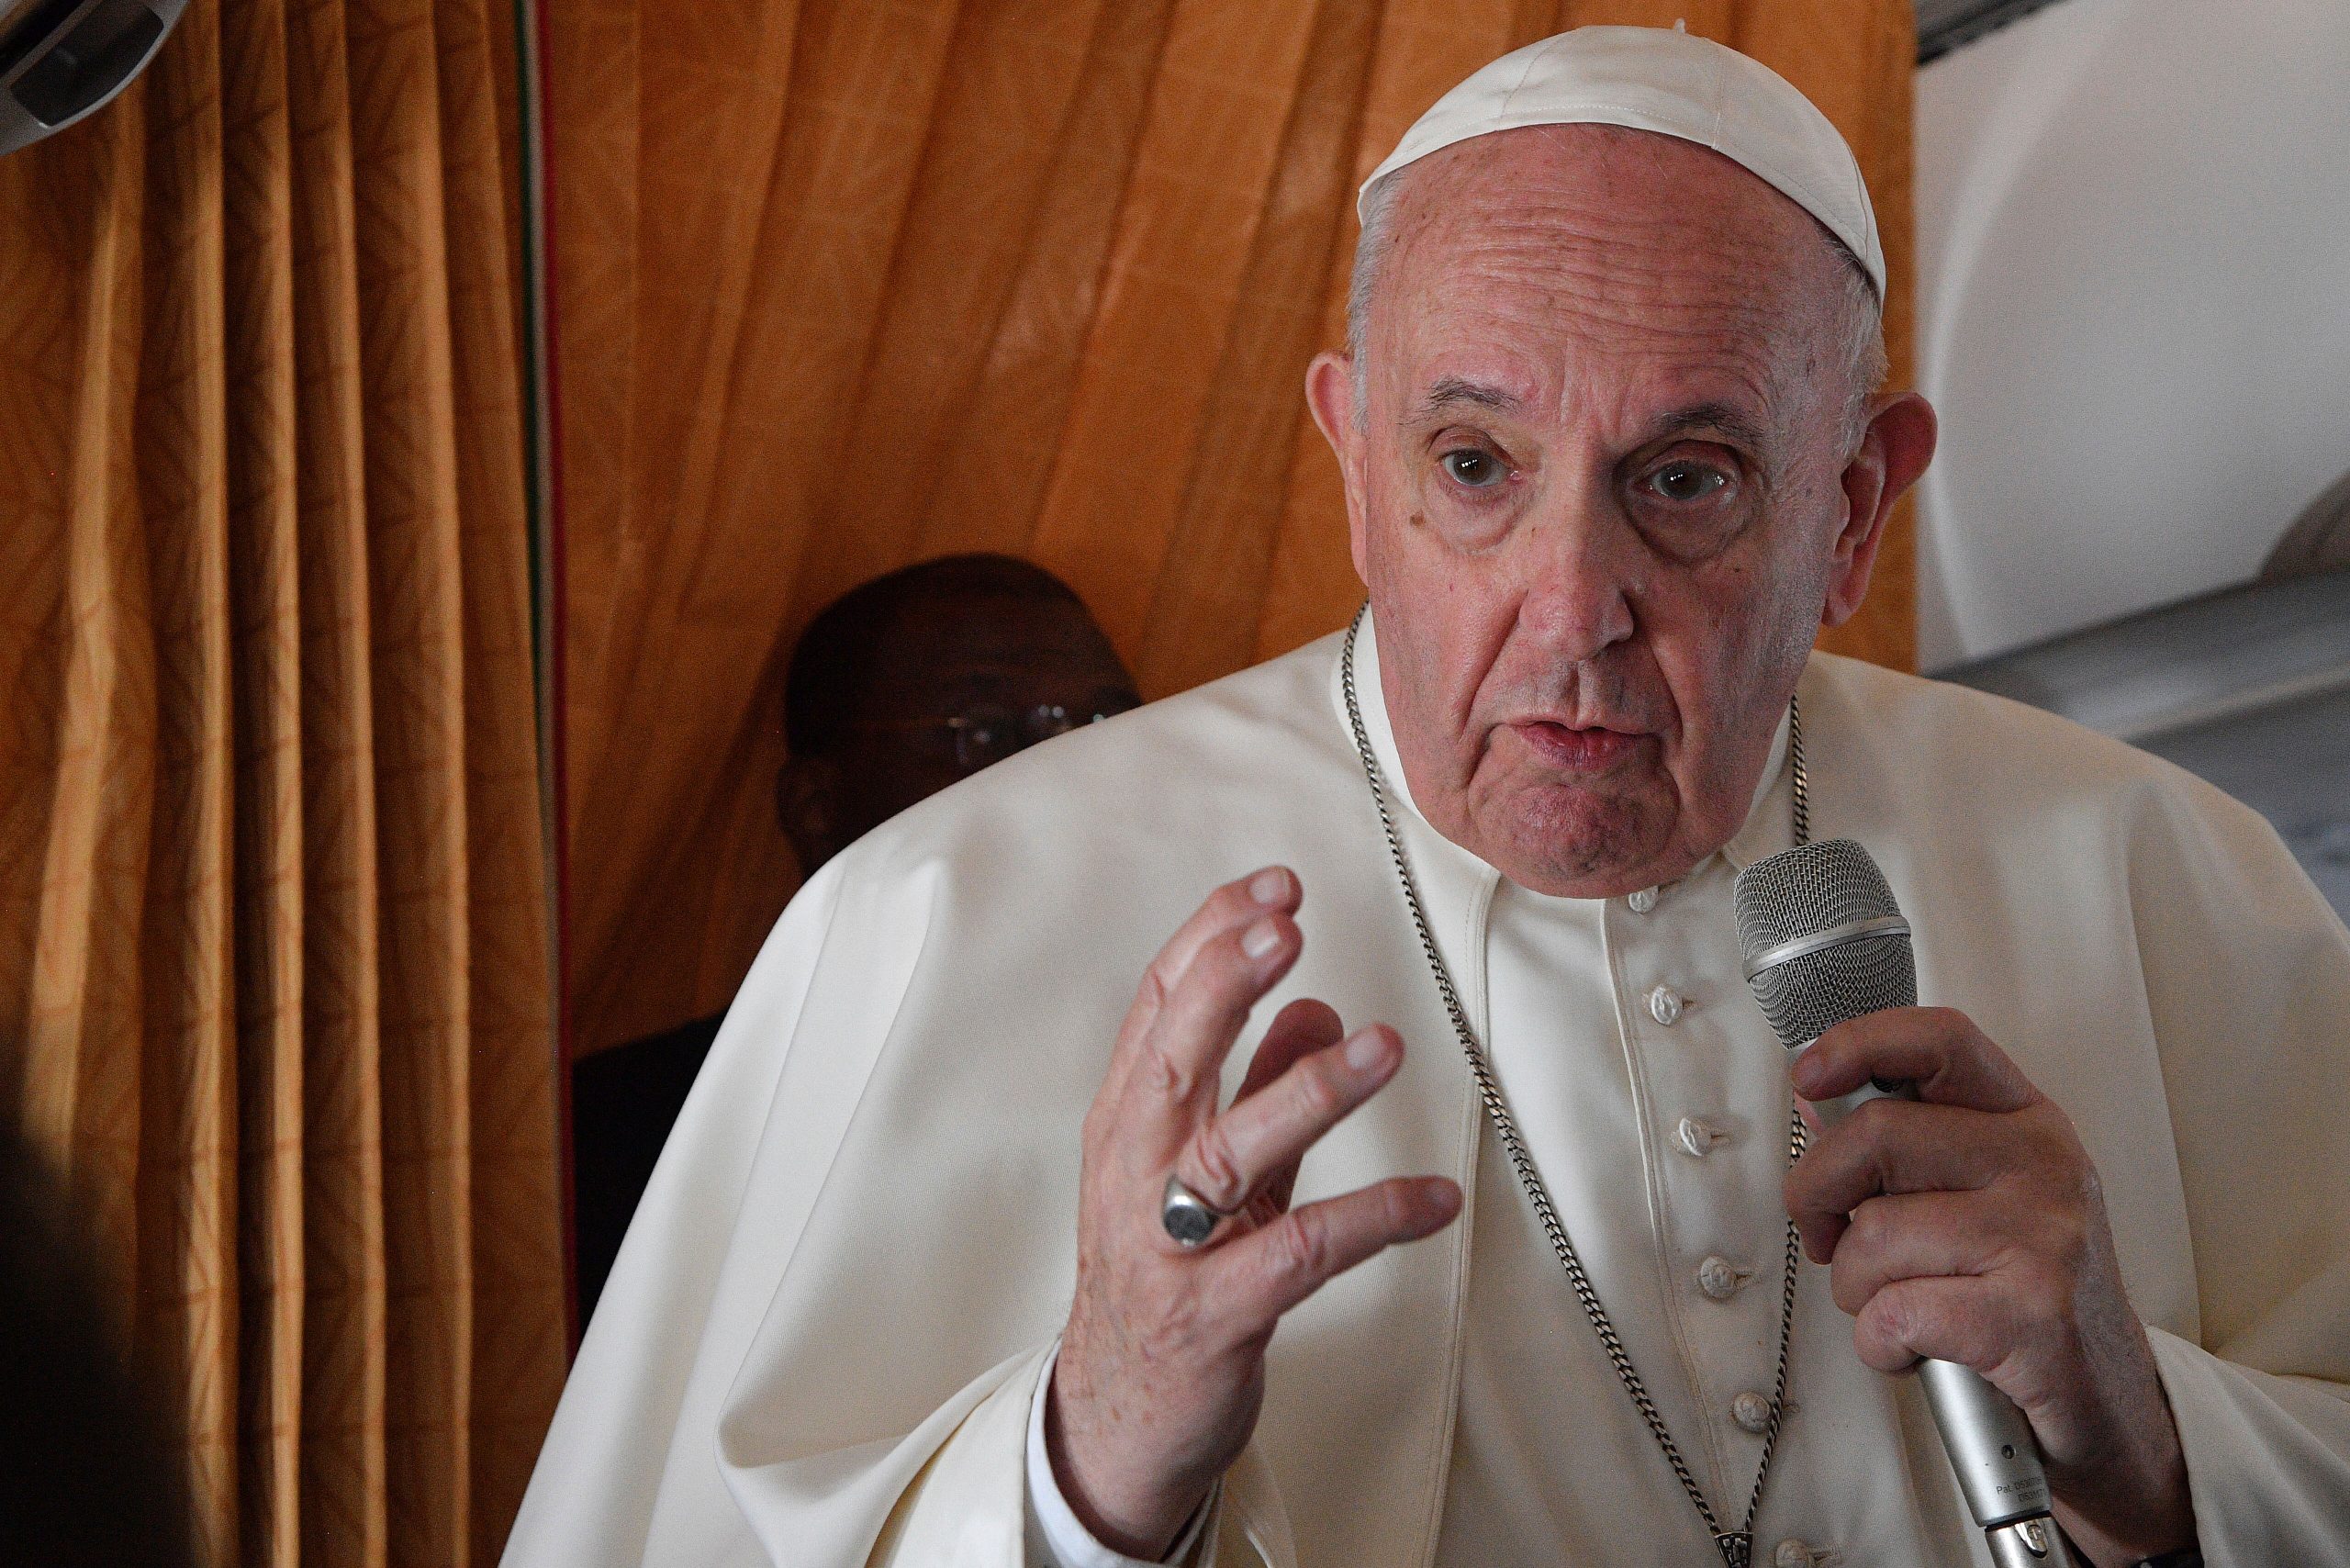 Pope Francis visits Russian embassy to express concern about Ukraine invasion